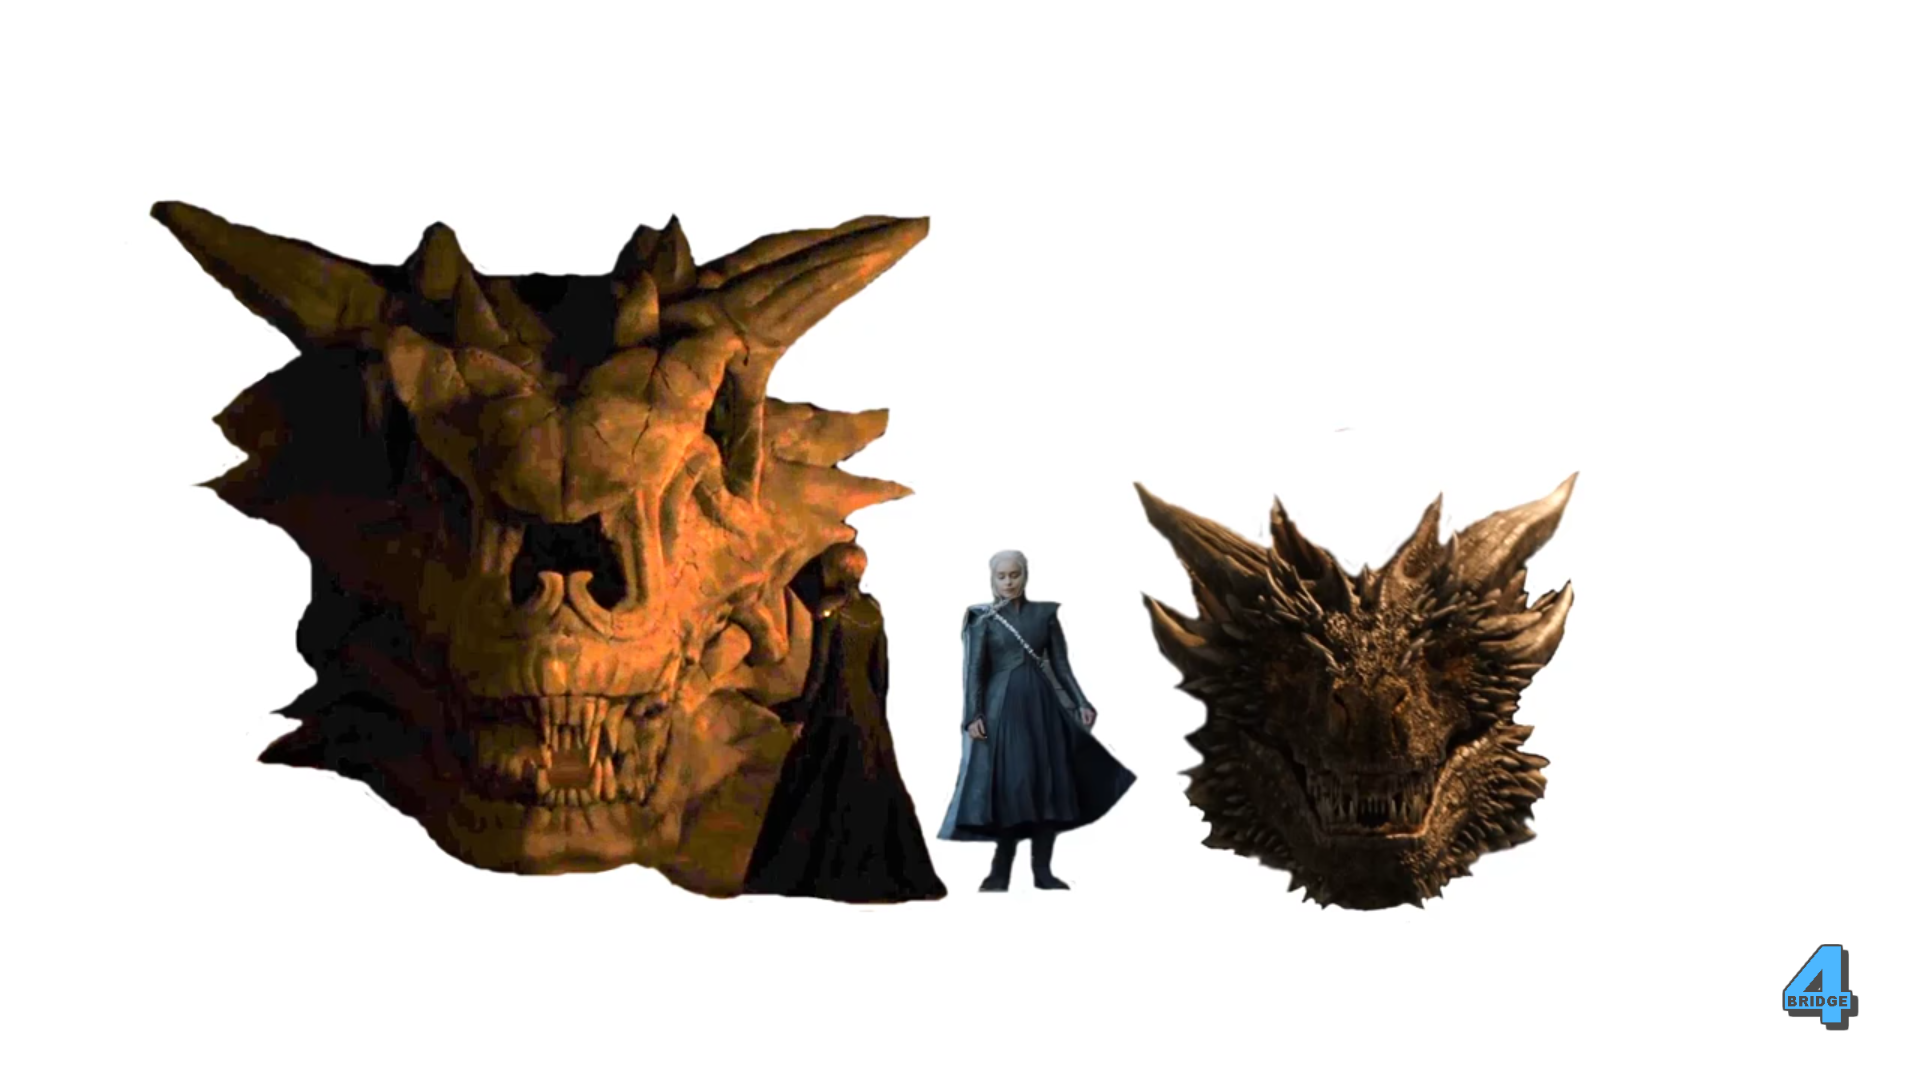 MAIN SPOILERS This is Drogon compared to Balerion with Dany for scale.: gameofthrones